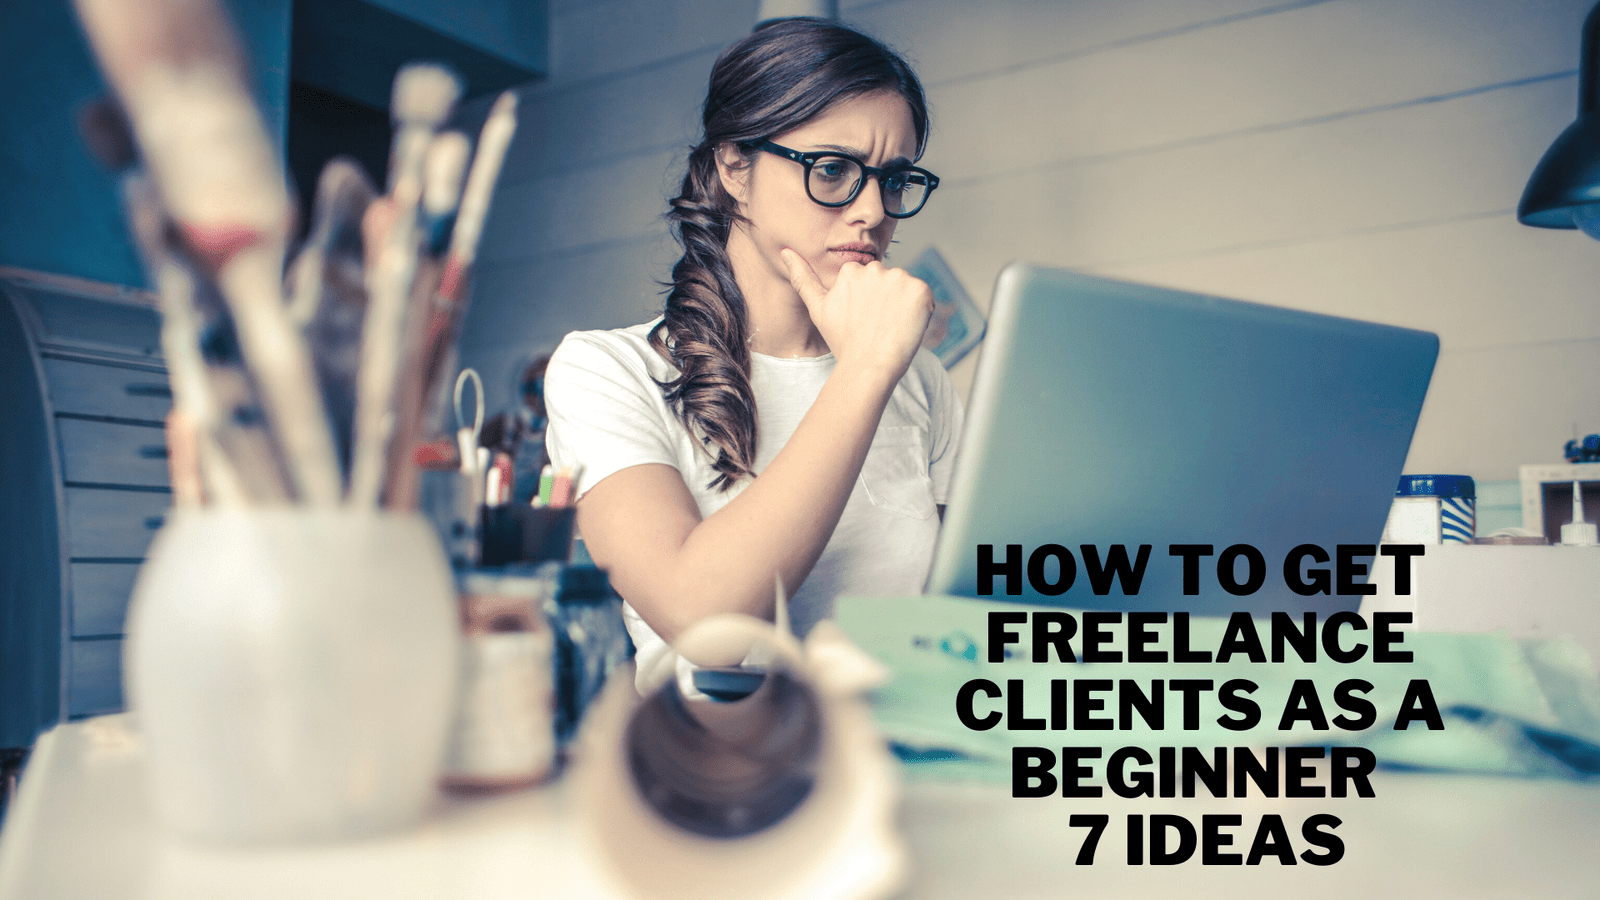 7 Ideas | How to Get Freelance Clients as a Beginner in 2022 , finding clients as a freelancer,upwork switch from freelancer to client,feedback for client upwork,upwork change from freelancer to client,good feedback for client in upwork,getting clients as a freelancer,upwork change from client to freelancer,bring your own freelancer upwork,upwork change client to freelancer,upwork switch from client to freelancer,how to get clients as a new freelancer.